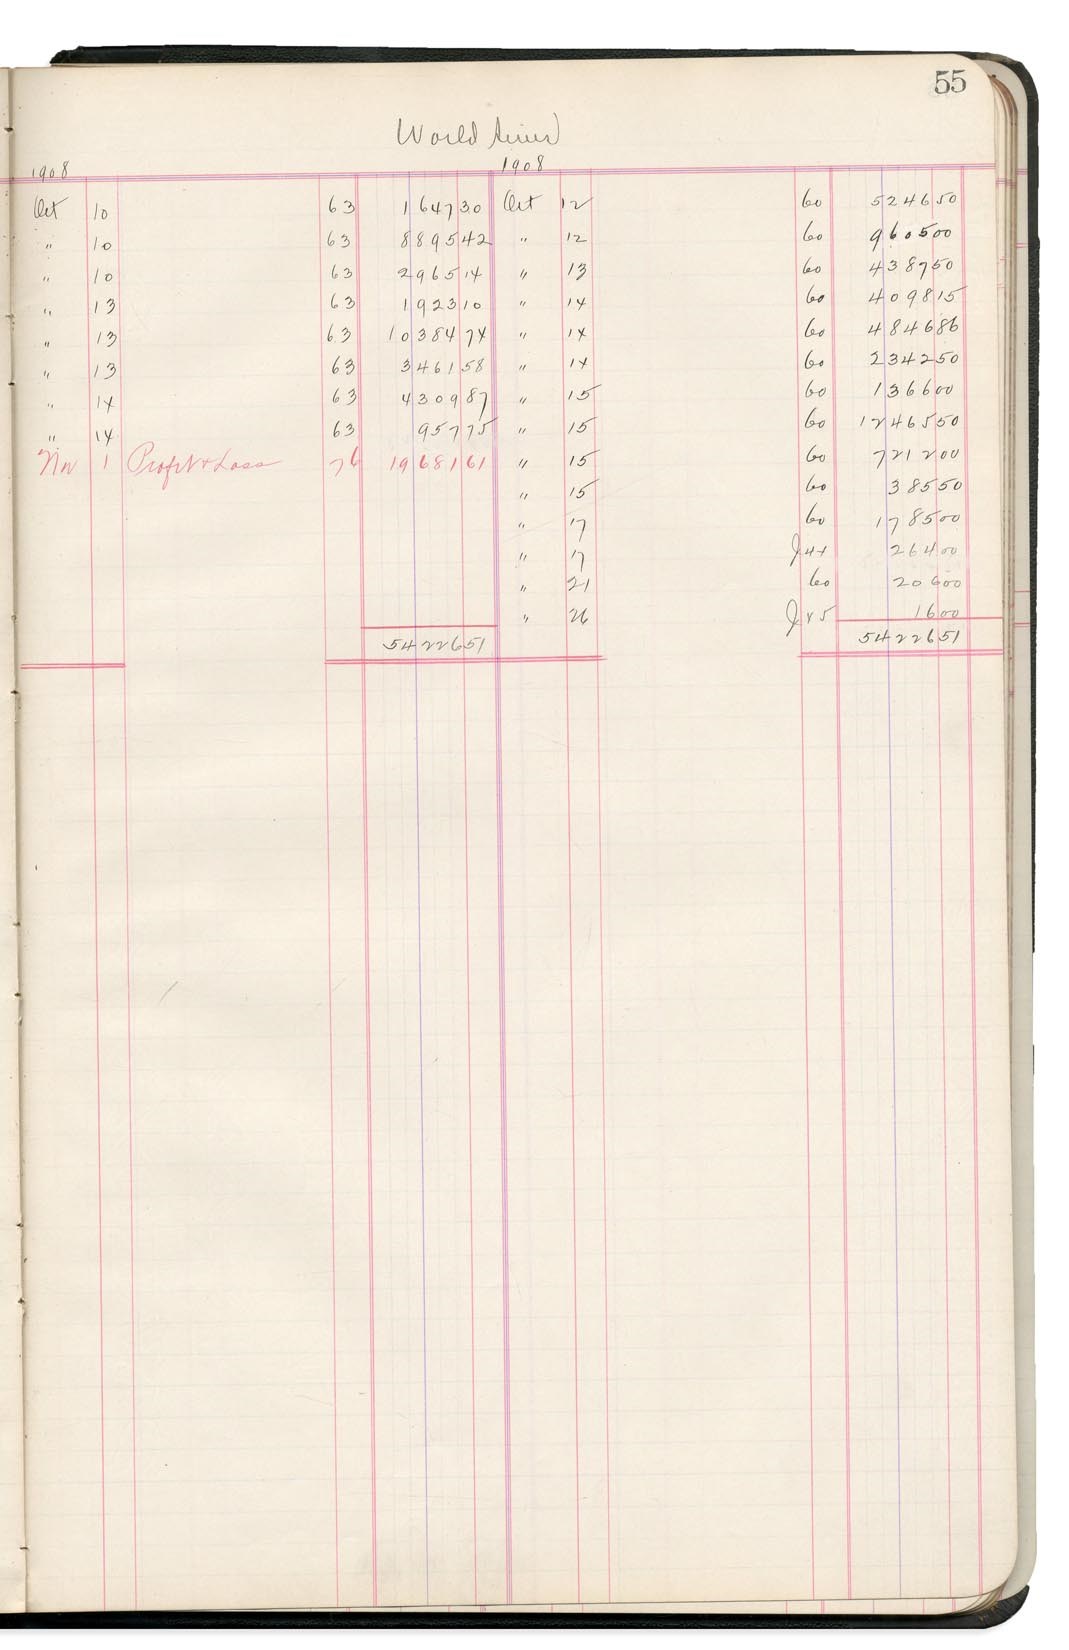 - 1908 A.L. Champion Detroit Tigers Financial Ledger Written in the Hand of Owner Frank Navin